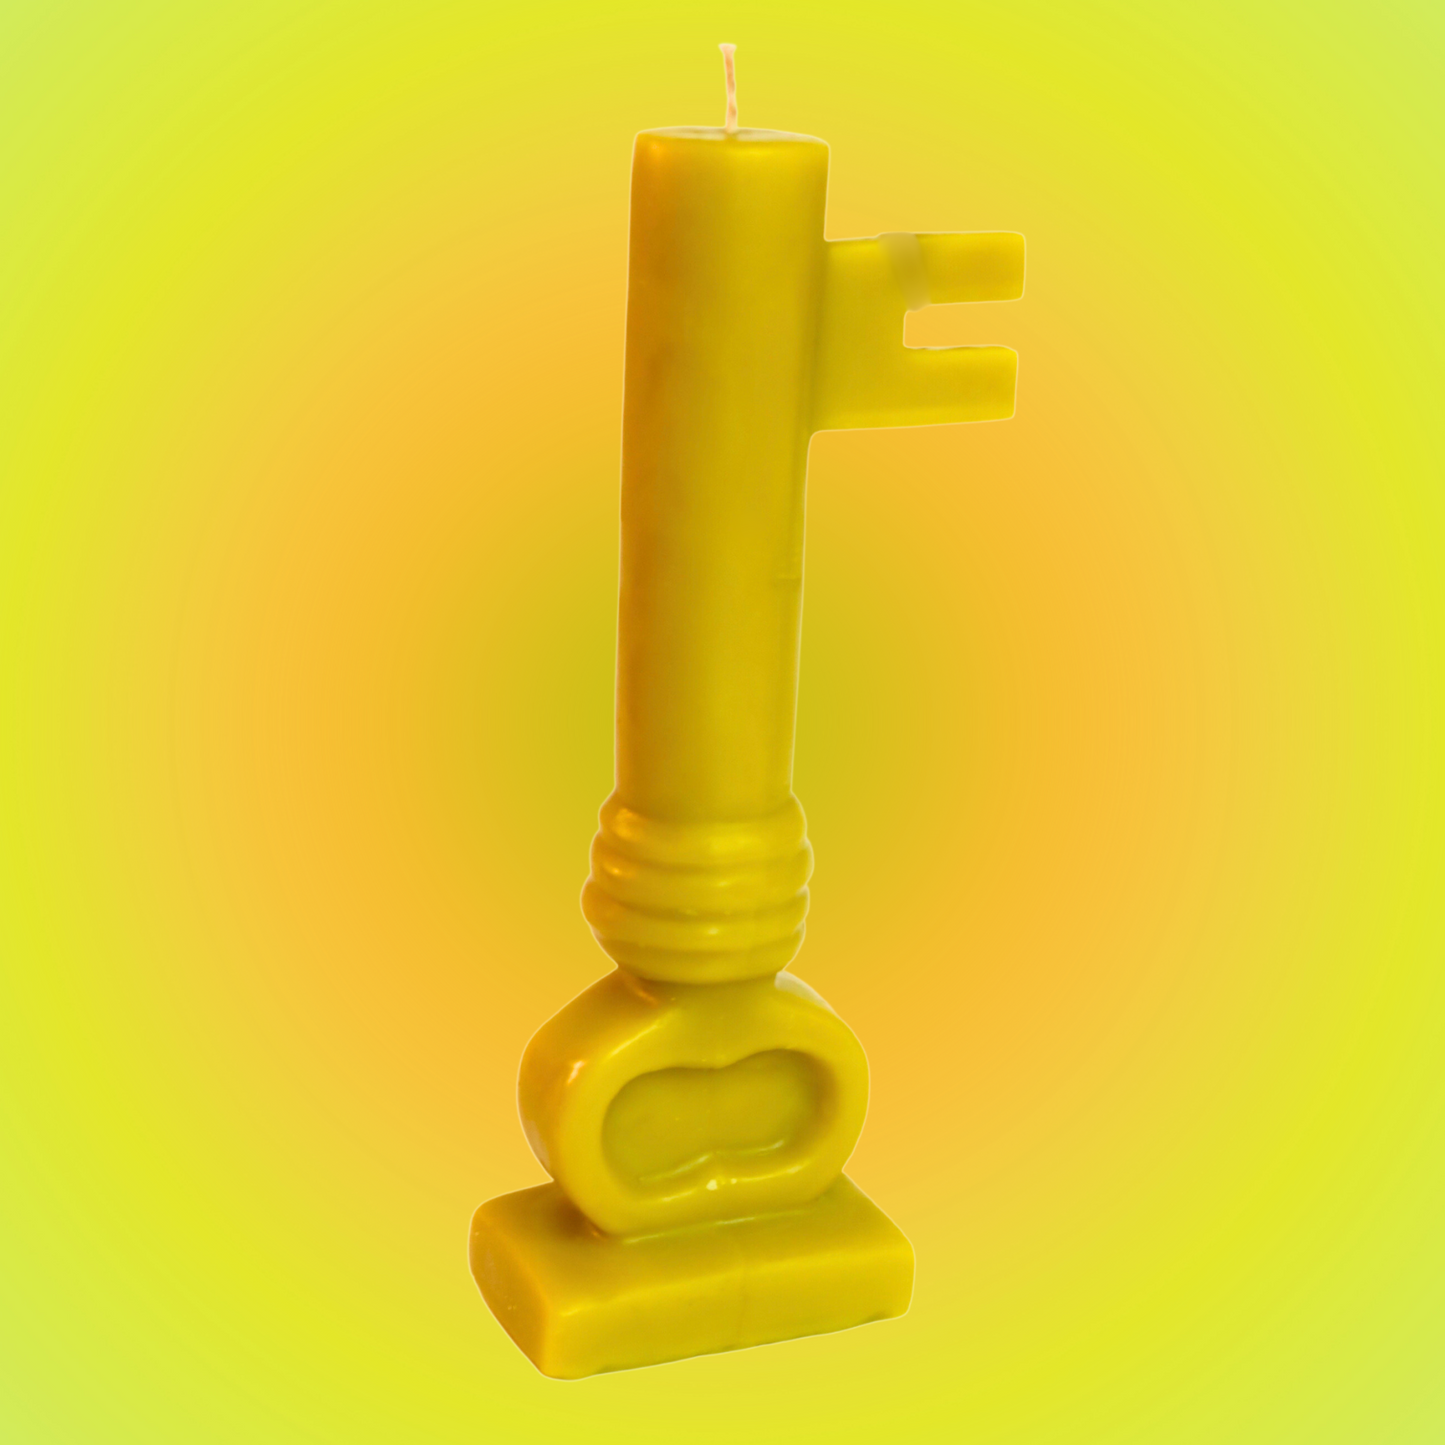 Key Road Opening Figure Candle